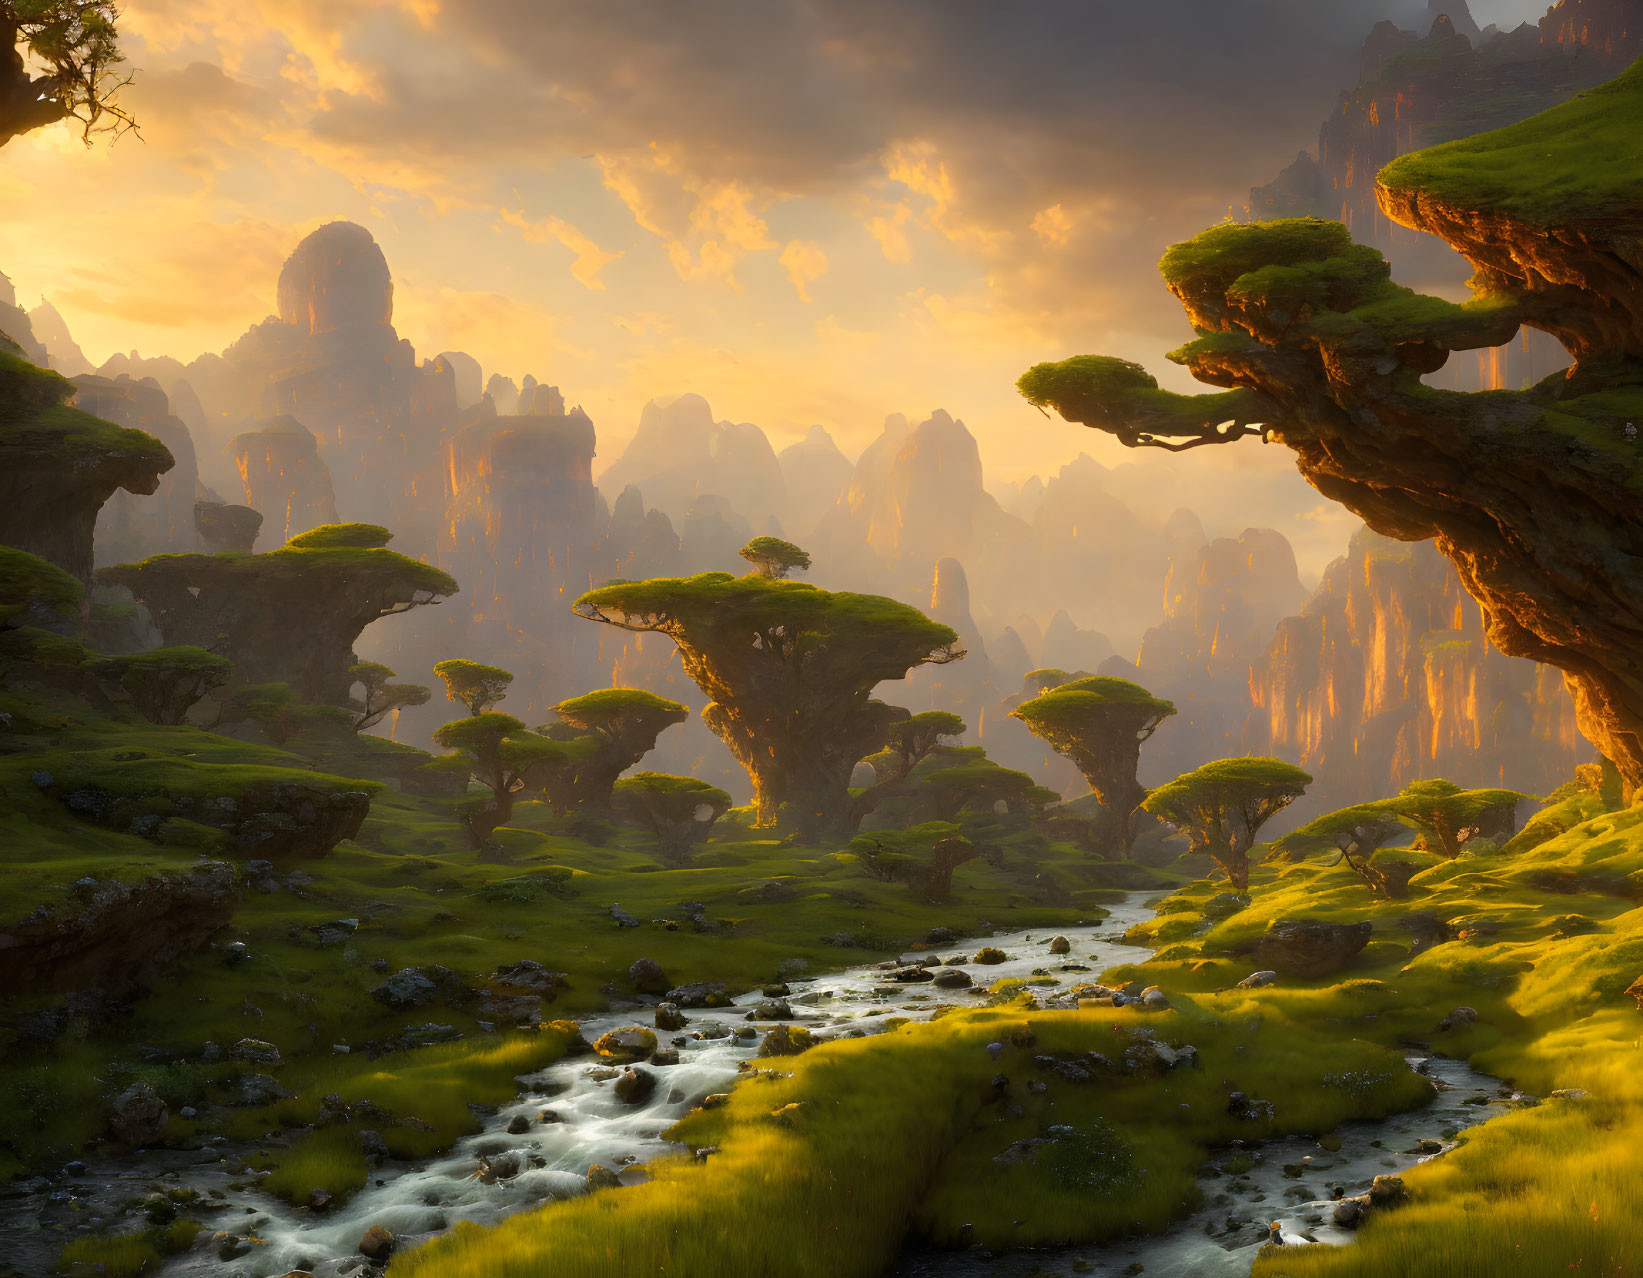 Fantastical landscape with towering rock formations and lush greenery